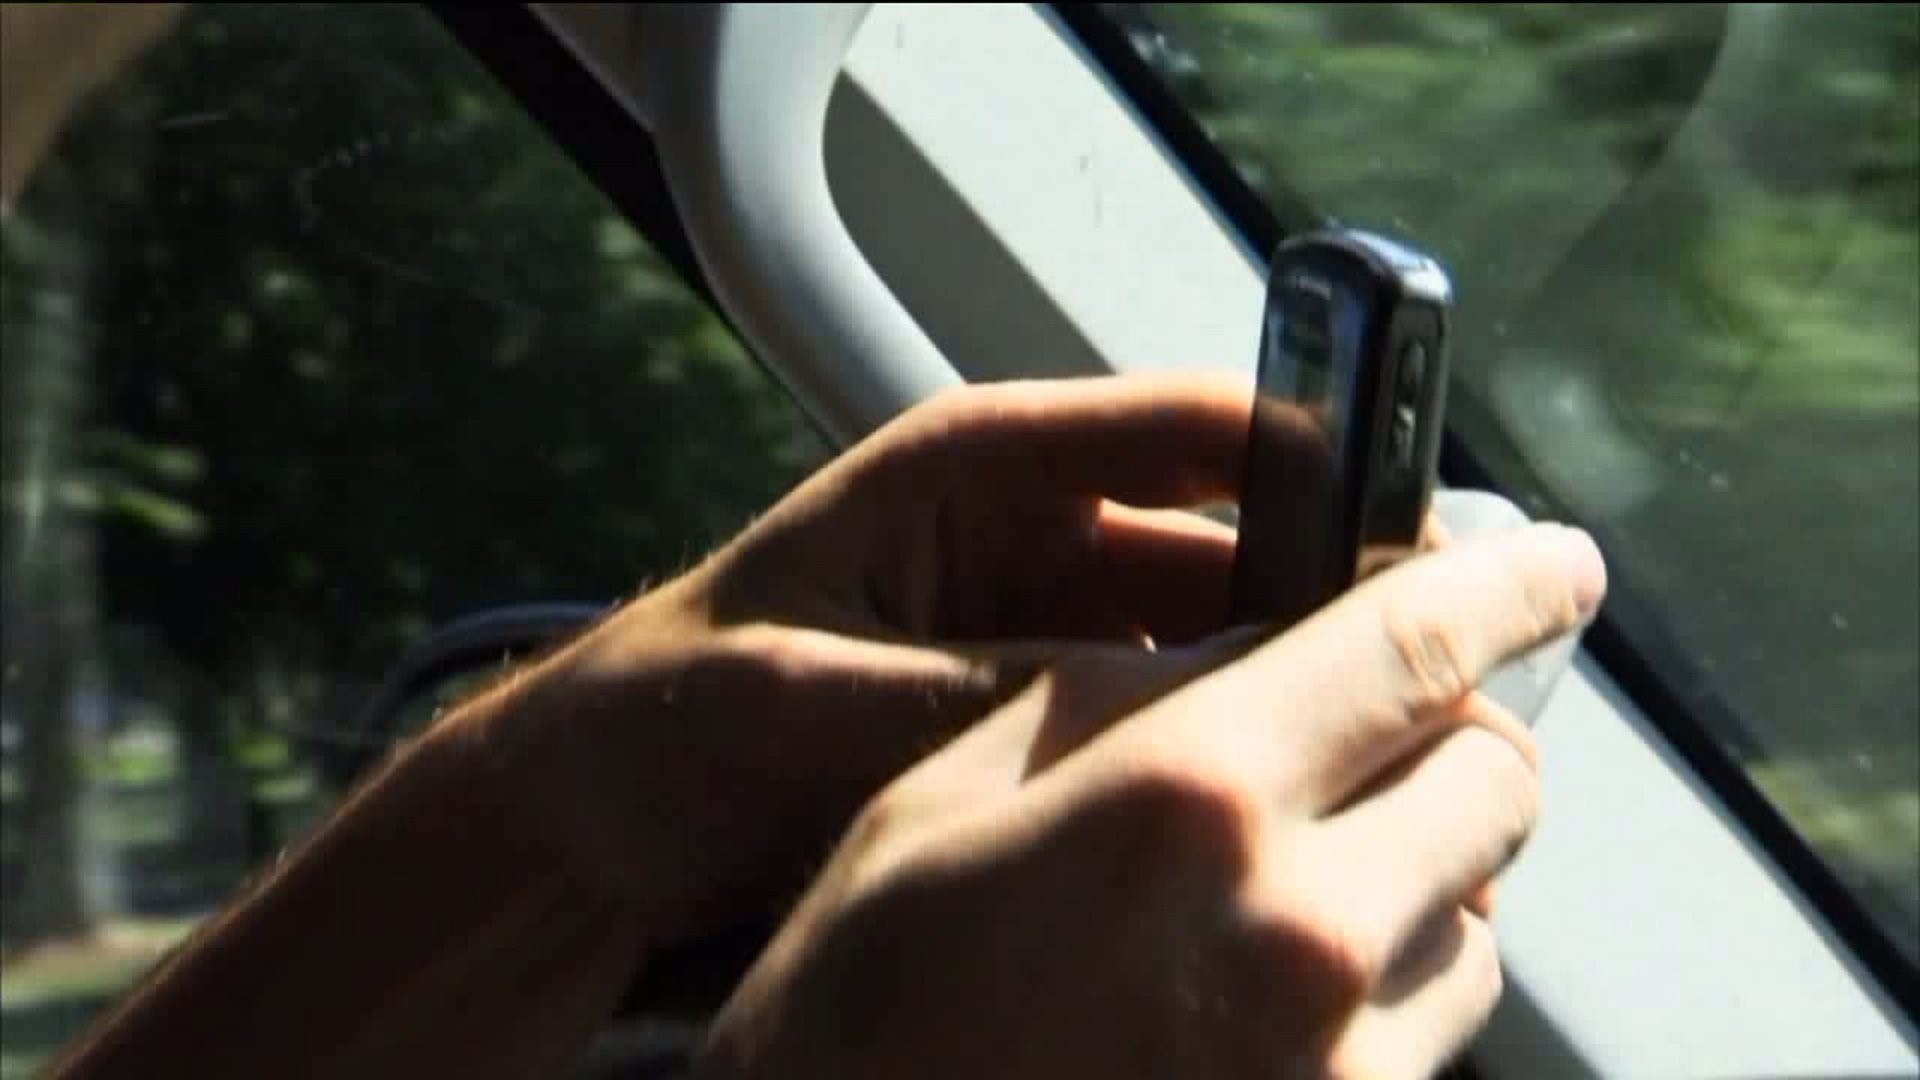 Charging Drivers Who Text Behind the Wheel